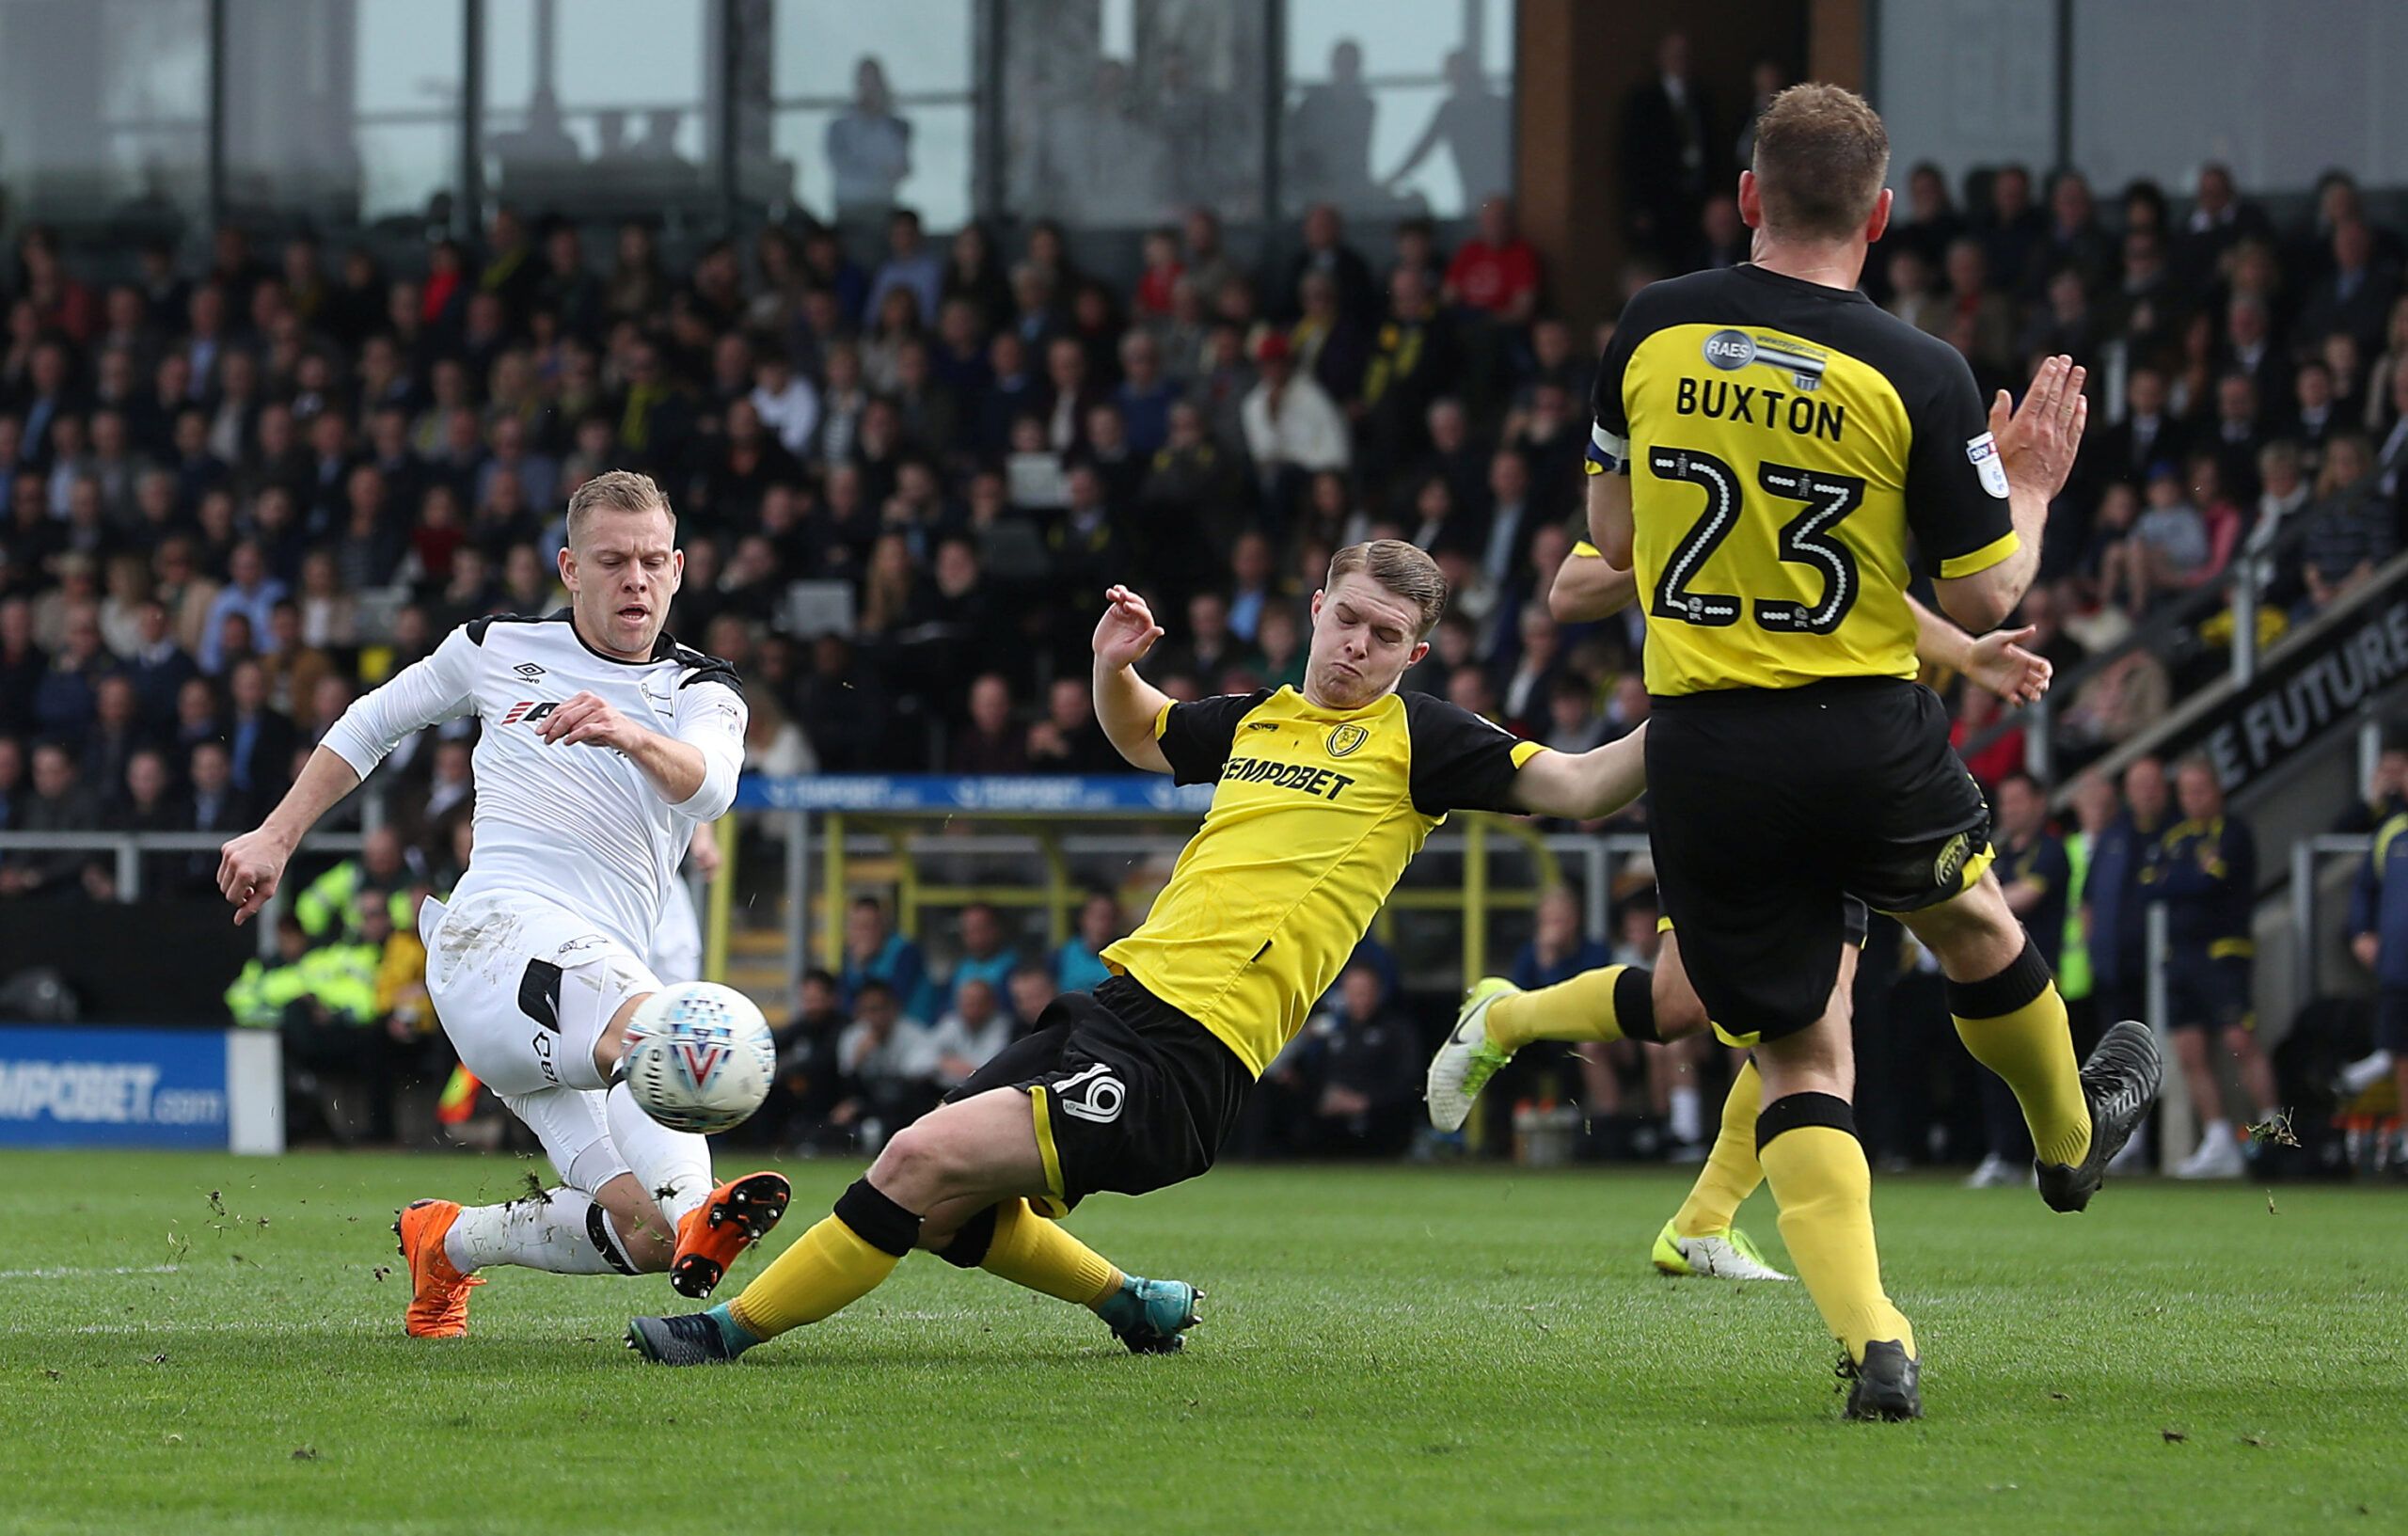 Soccer Football - Championship - Burton Albion vs Derby County - Pirelli Stadium, Burton-on-Trent, Britain - April 14, 2018   Derby County's Matej Vydra in action with Burton Albion's Jacob Davenport   Action Images/John Clifton    EDITORIAL USE ONLY. No use with unauthorized audio, video, data, fixture lists, club/league logos or 